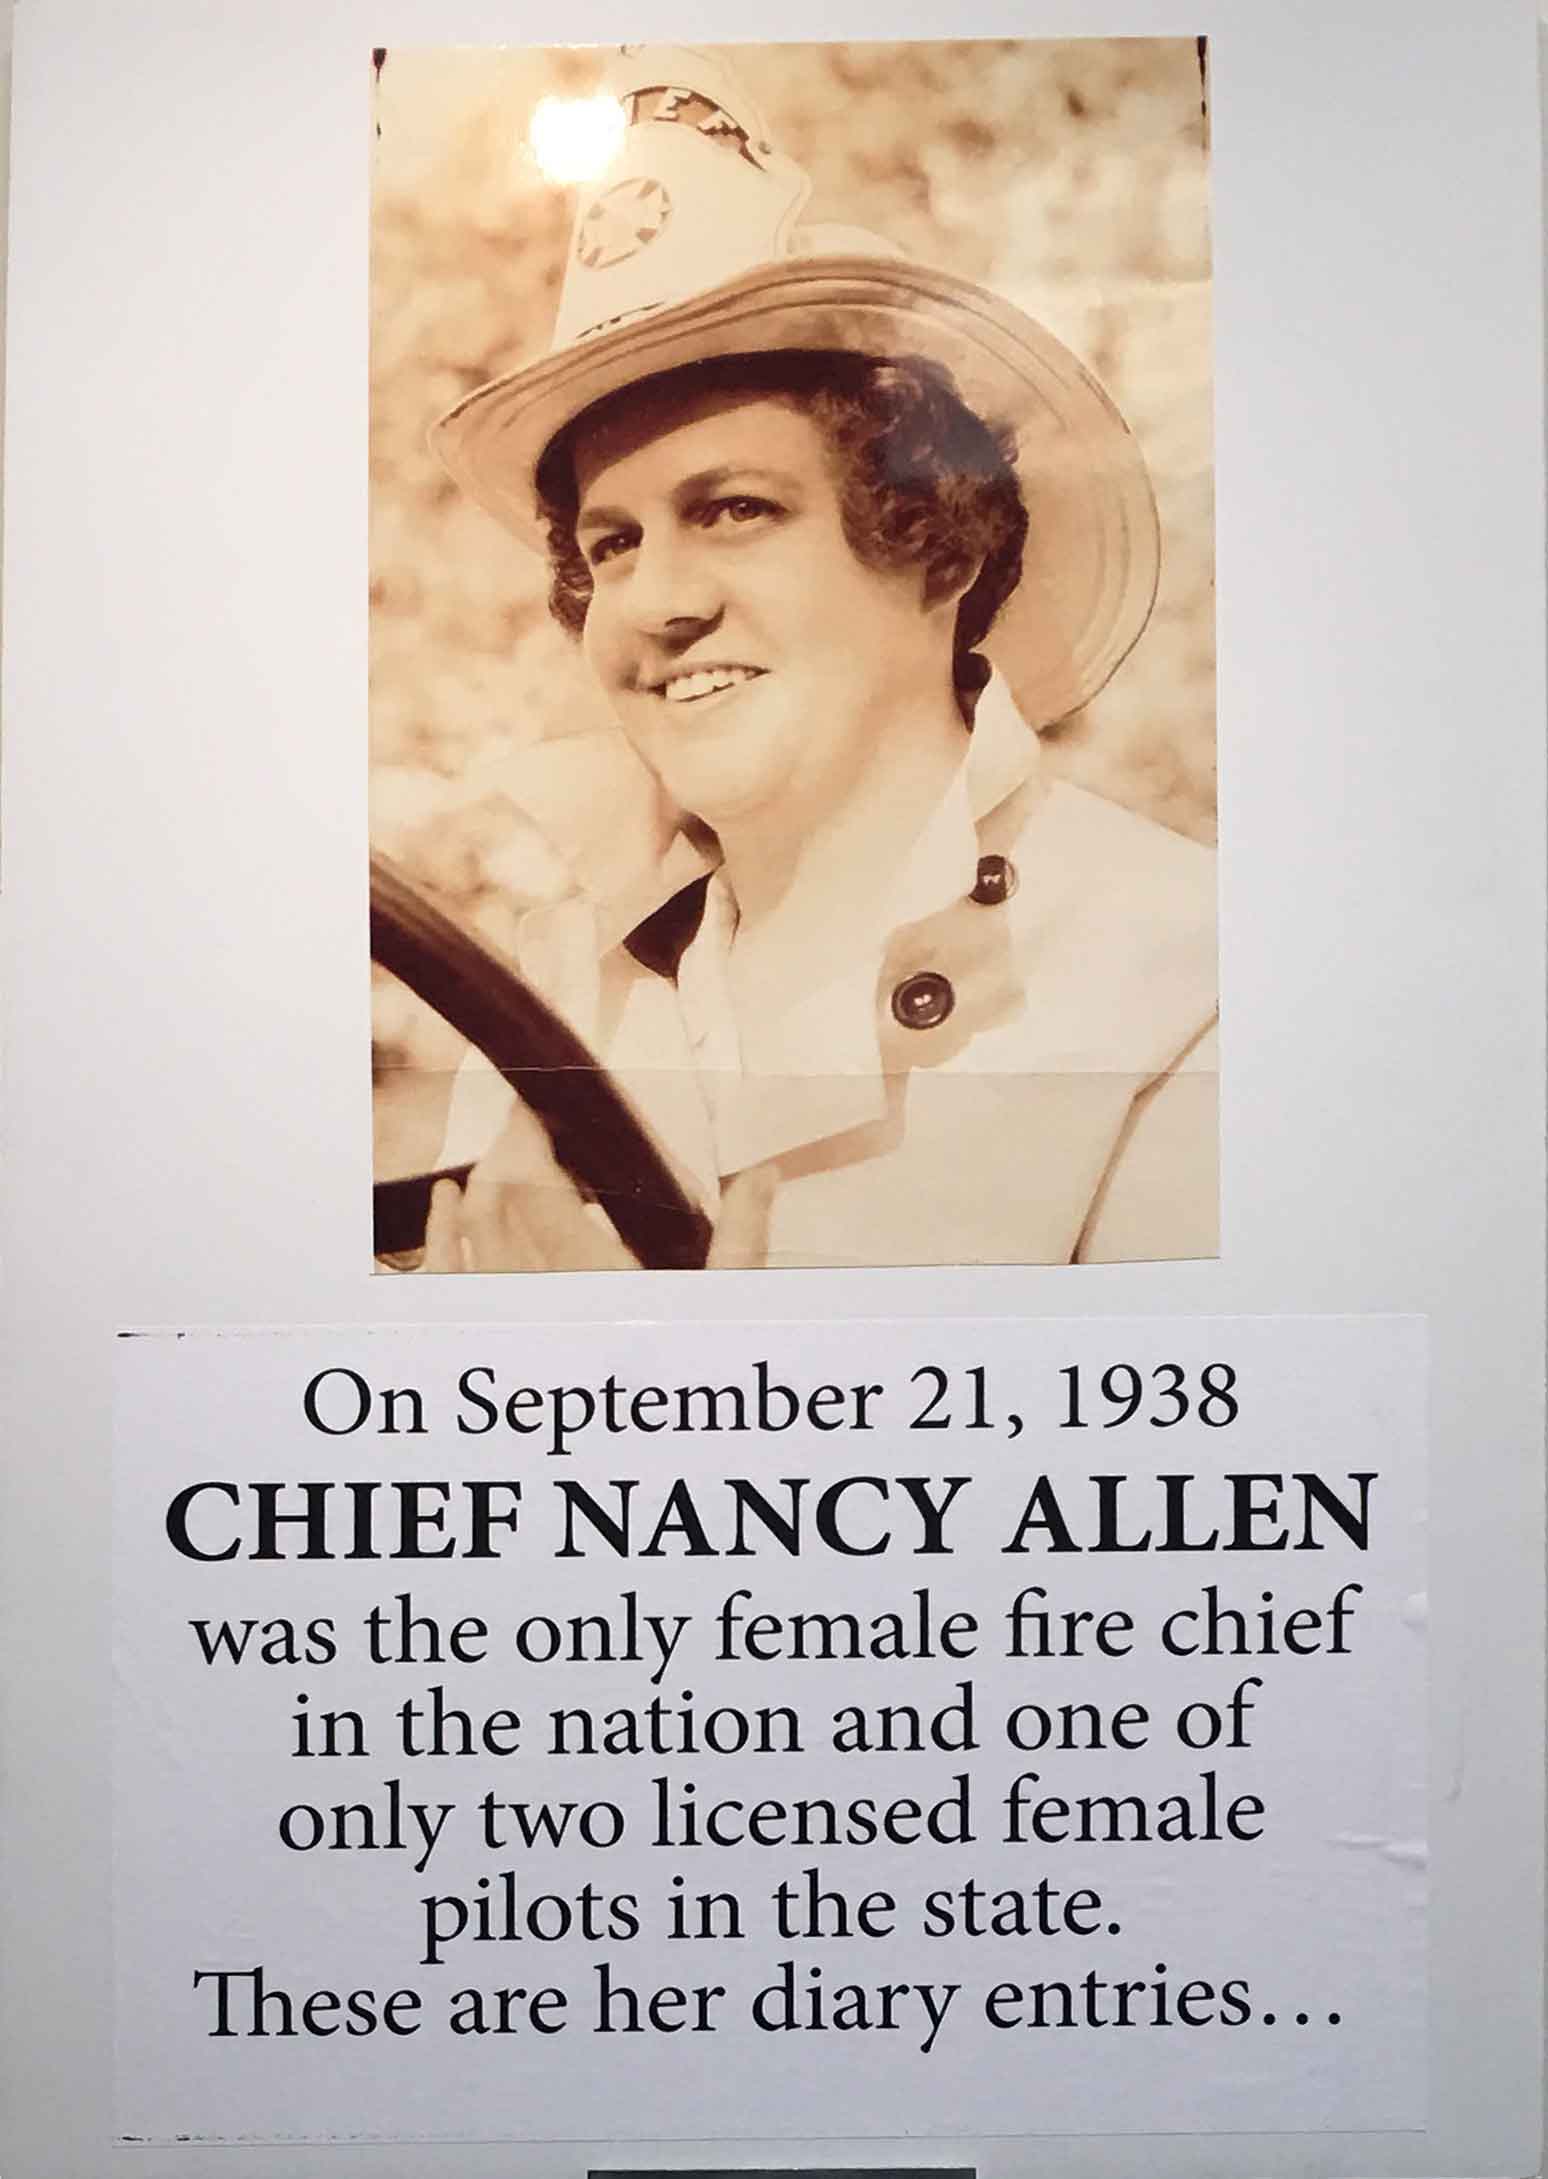 Chief Nancy Allen, the only female fire chief in the nation and one of only 2 licensed female pilots in the state…